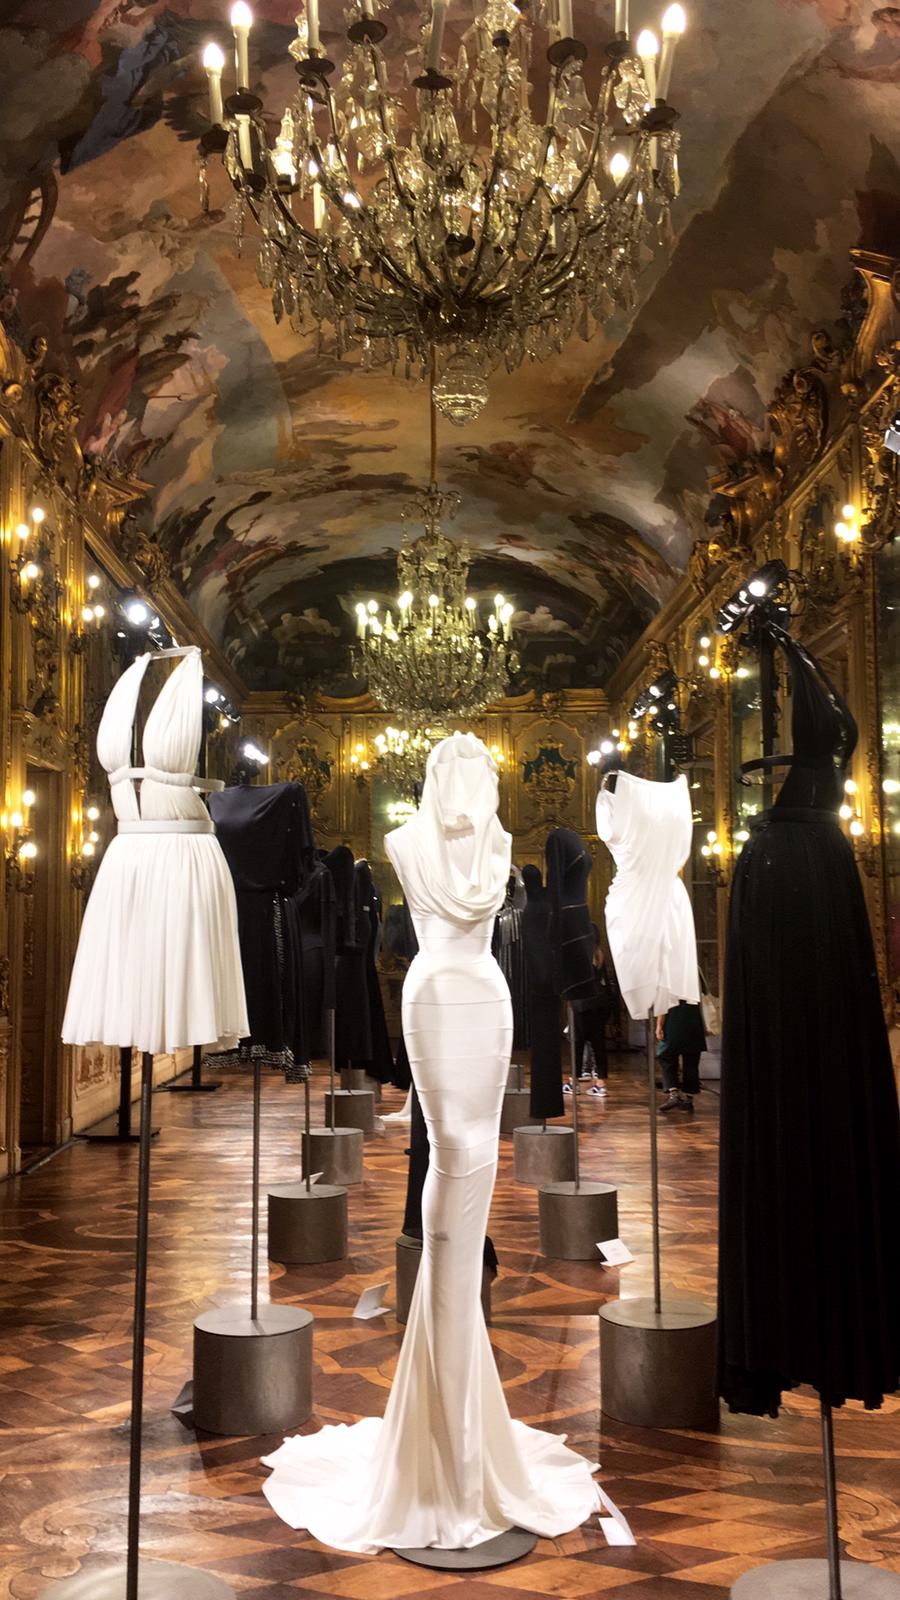 Milan Fashion Week: events, shows and shopping experiences